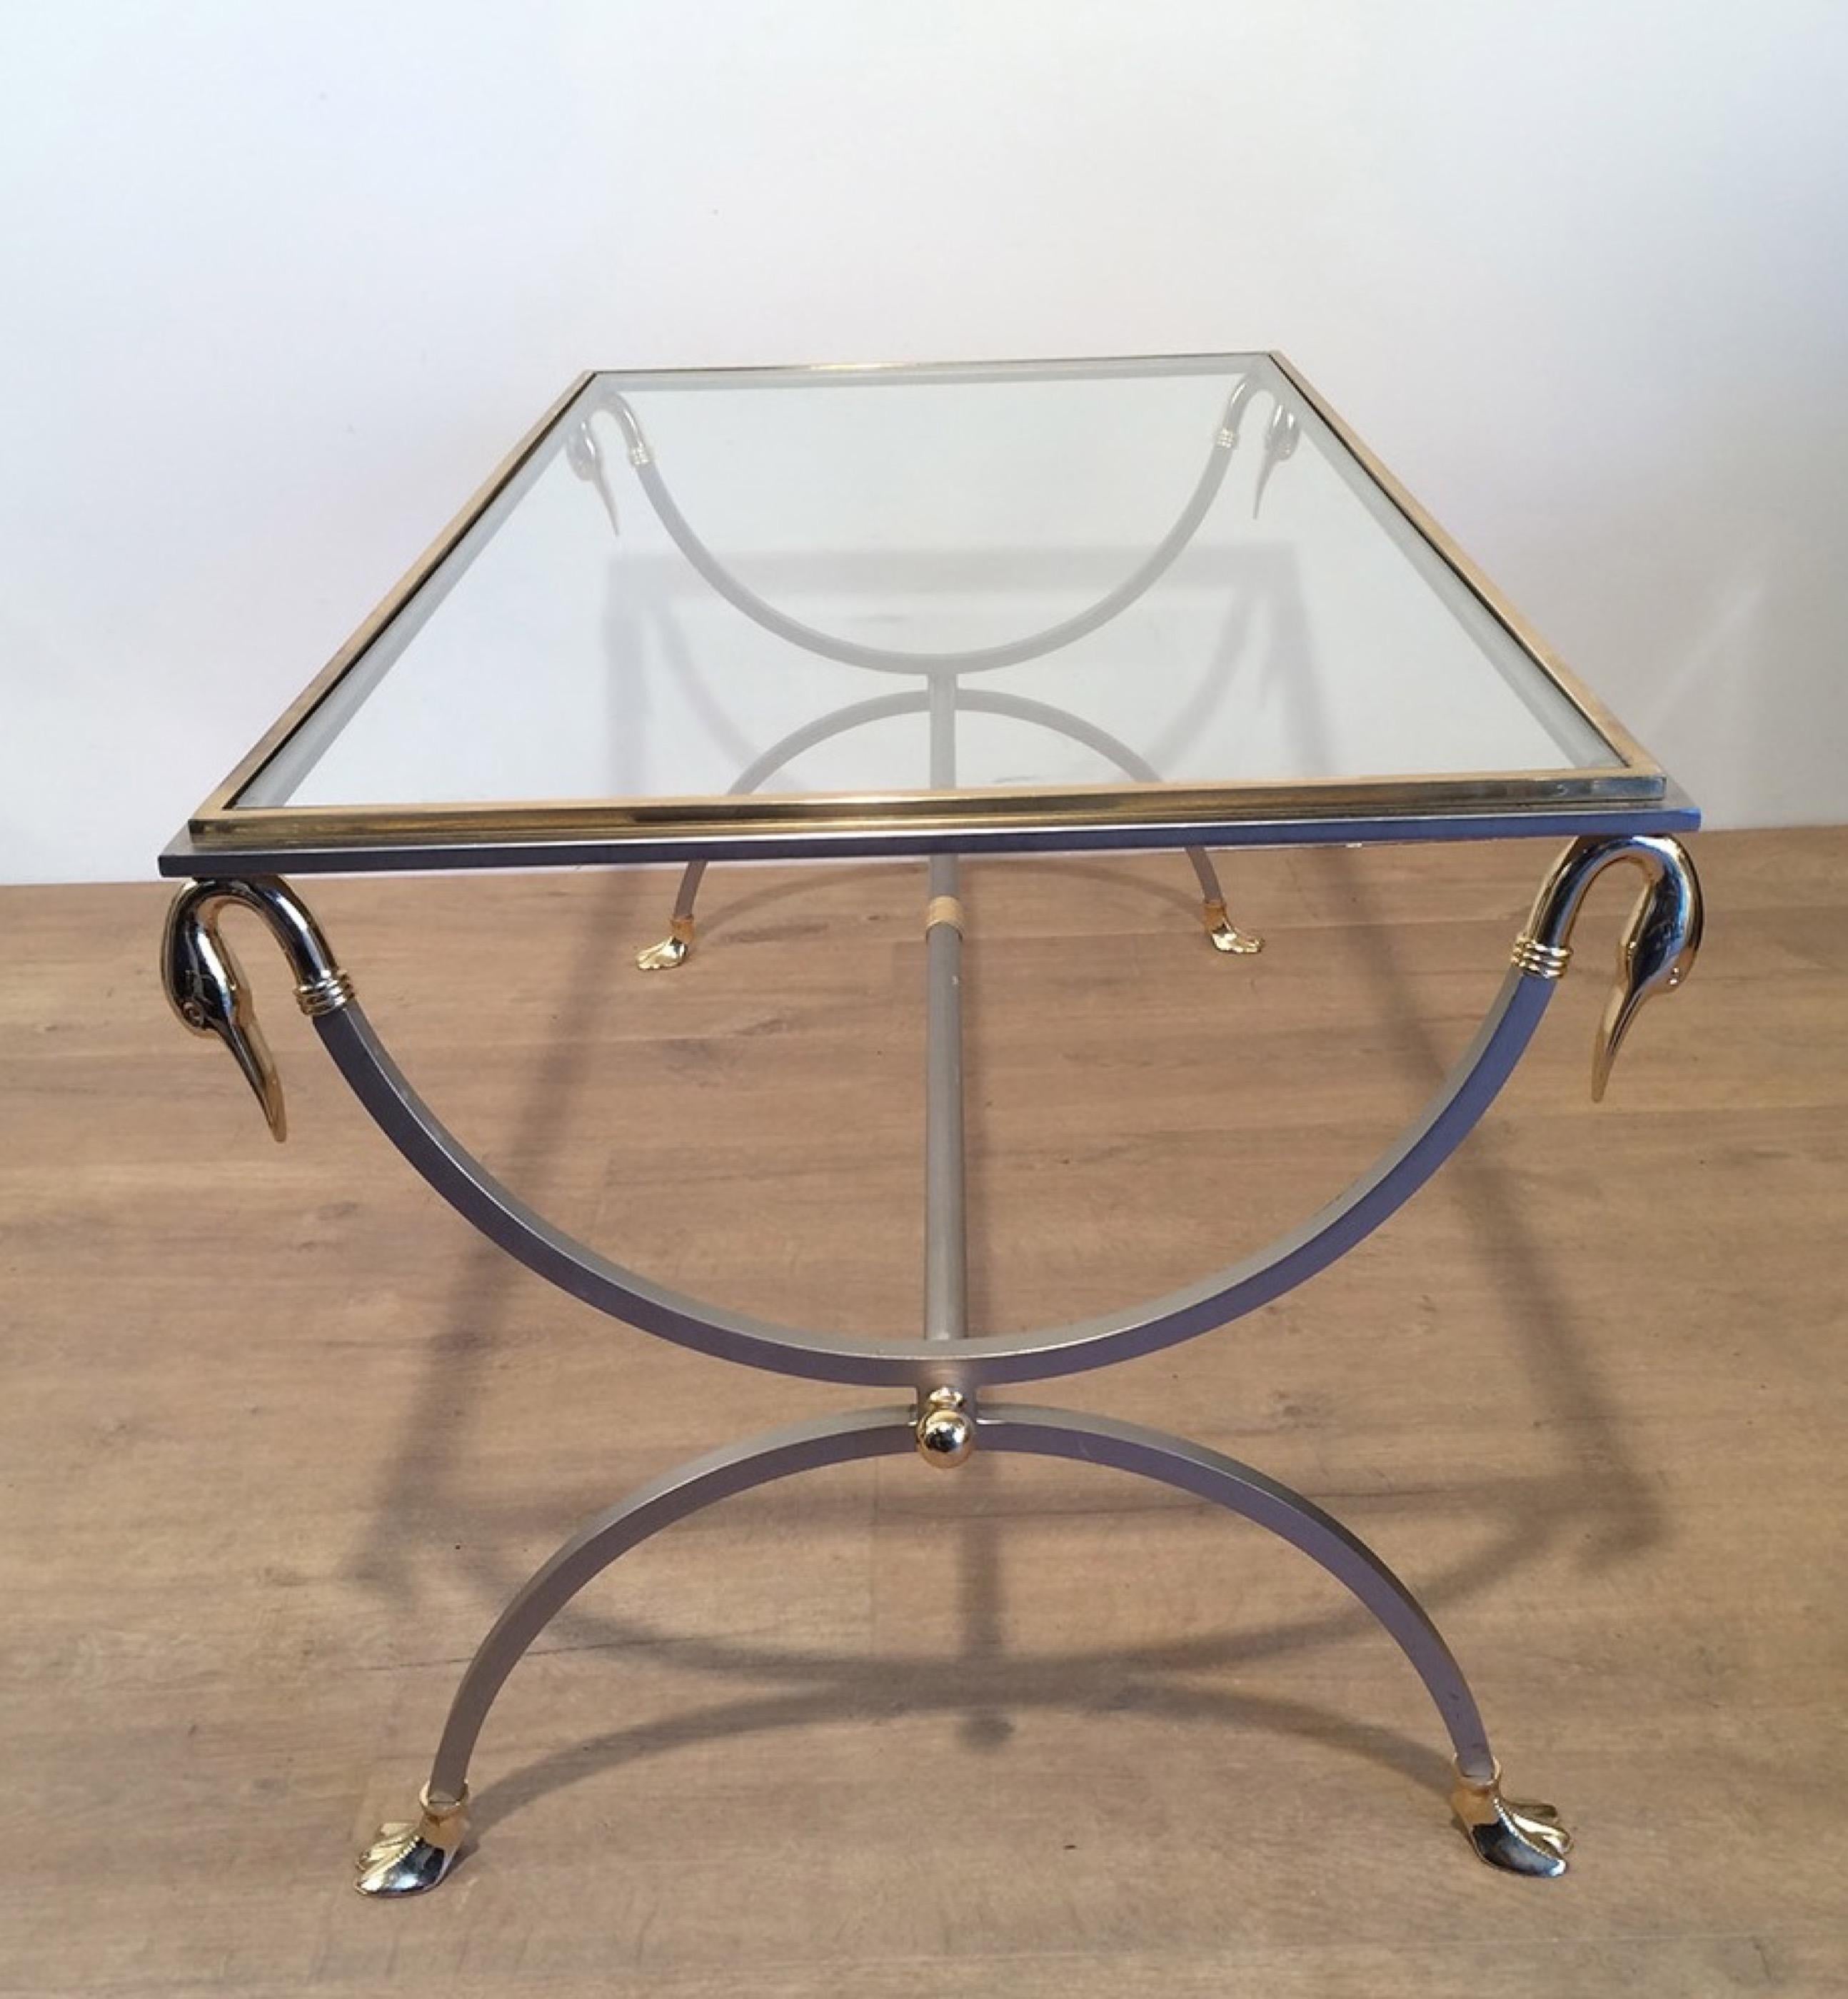 Attributed to Maison Jansen, Brushed Steel & Brass Coffee Table with Swanheads In Good Condition For Sale In Marcq-en-Barœul, Hauts-de-France